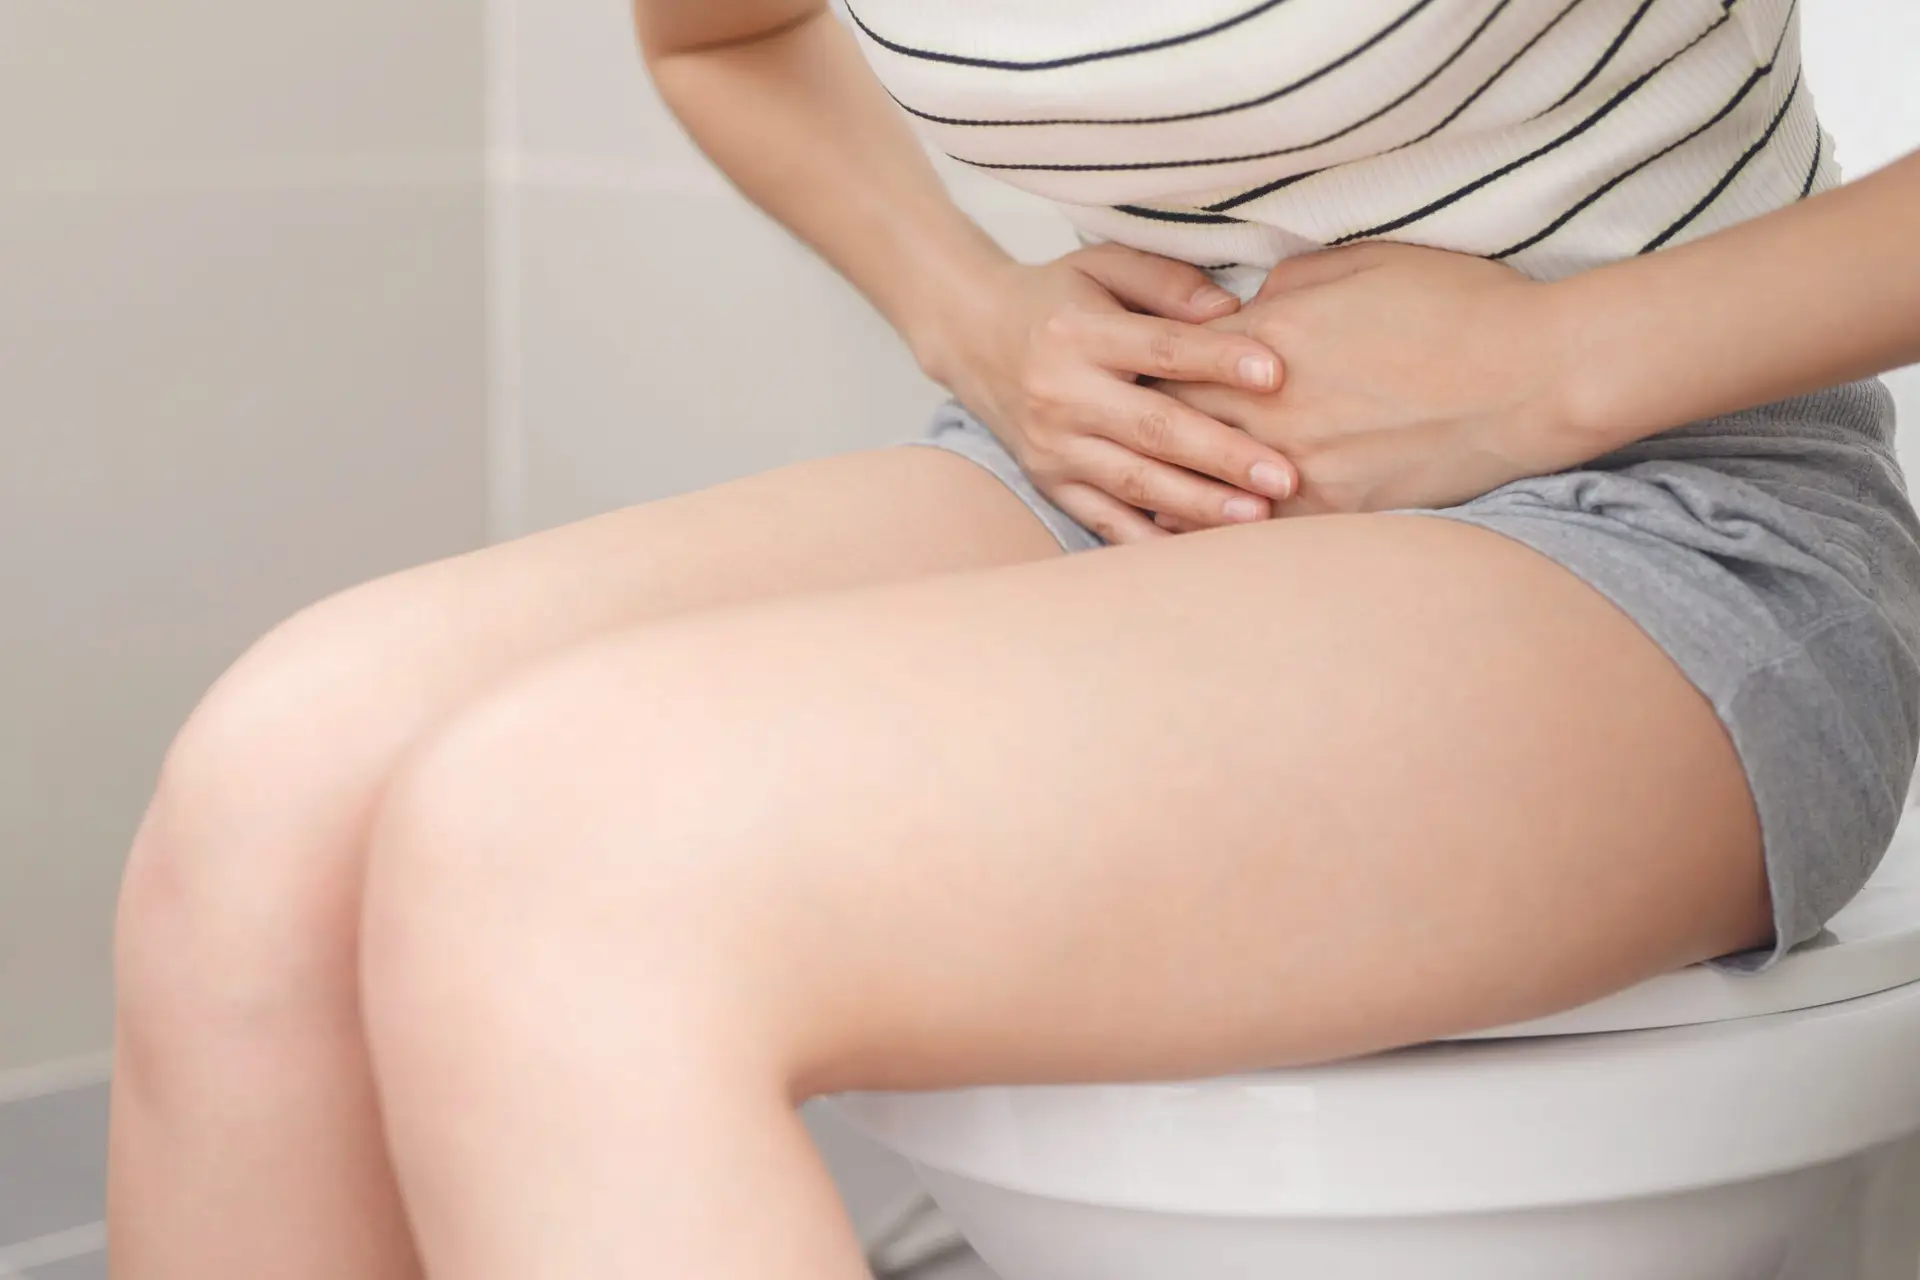 Pharmacy First: Urinary Tract Infection